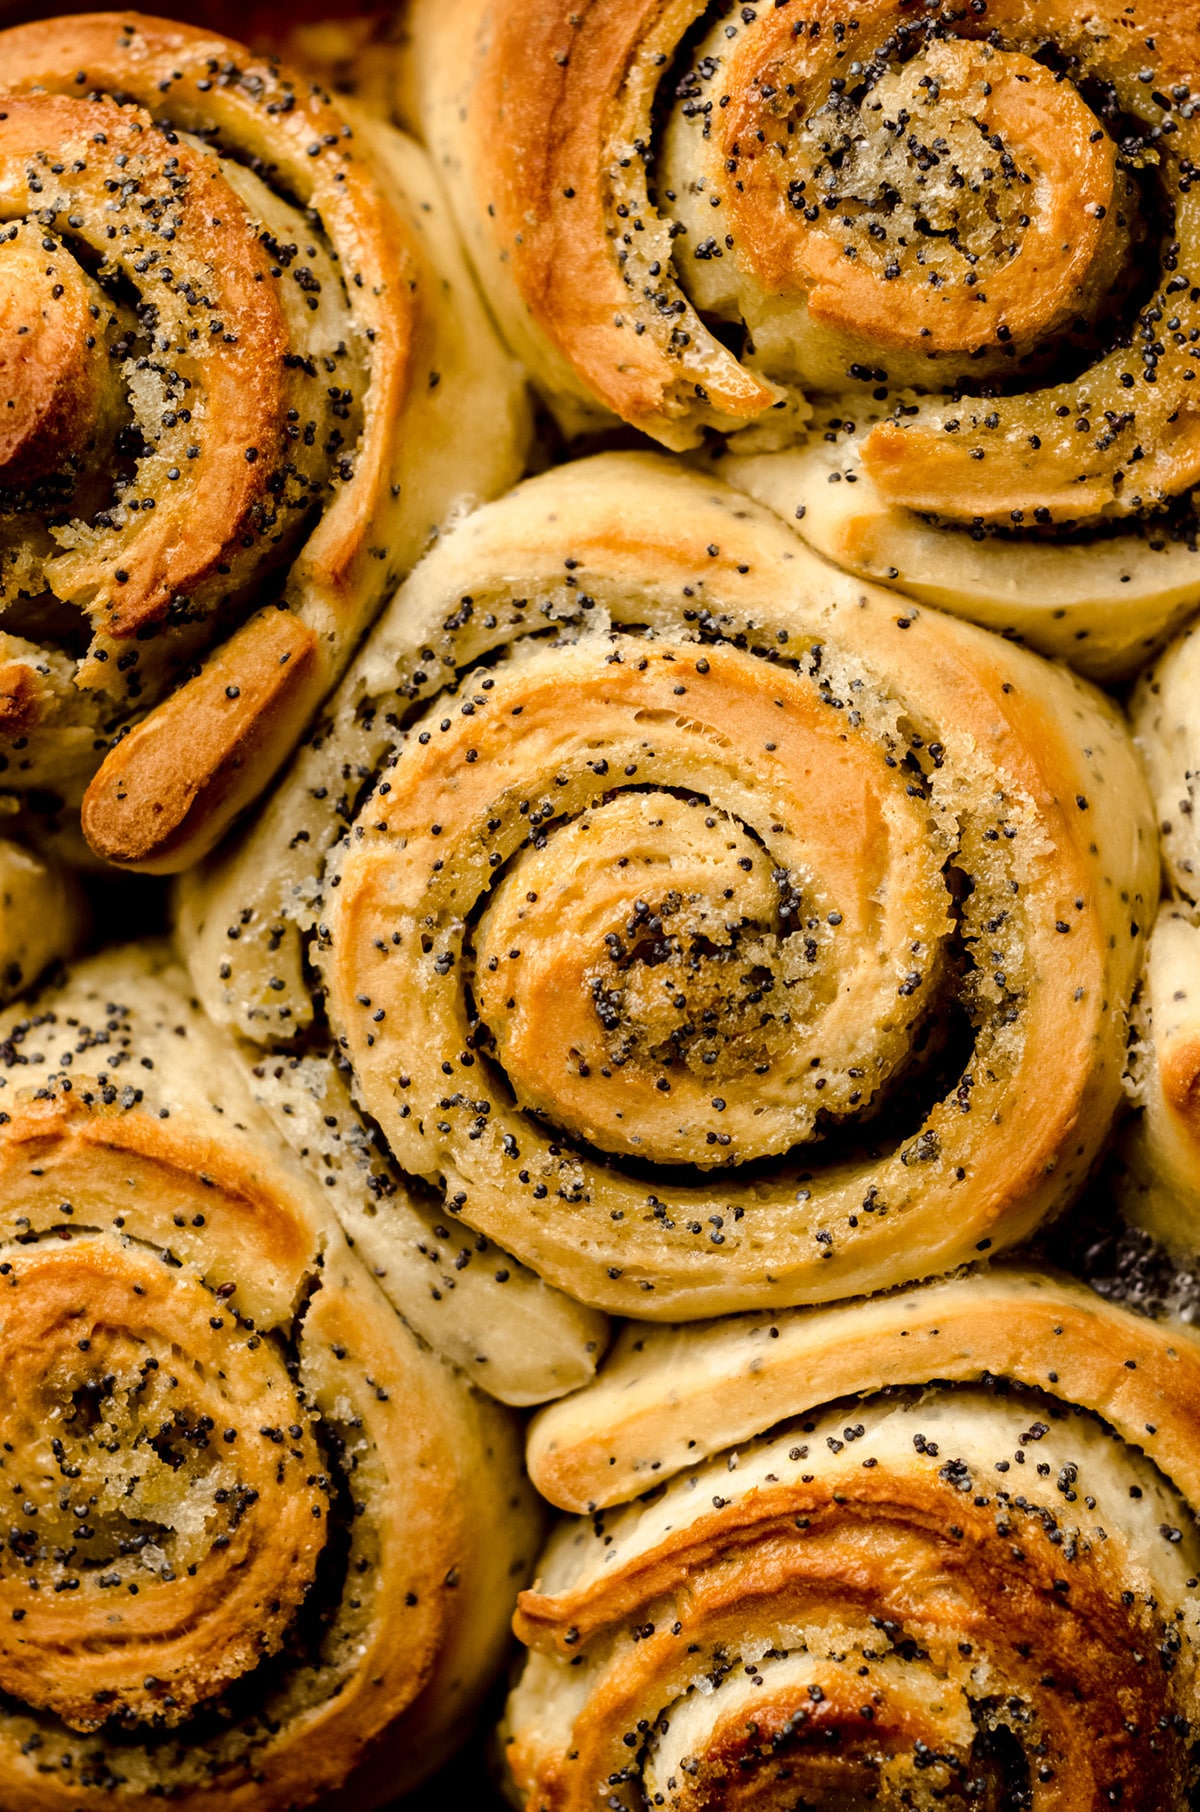 Lemon poppy seed sweet rolls that have been baked until light brown.